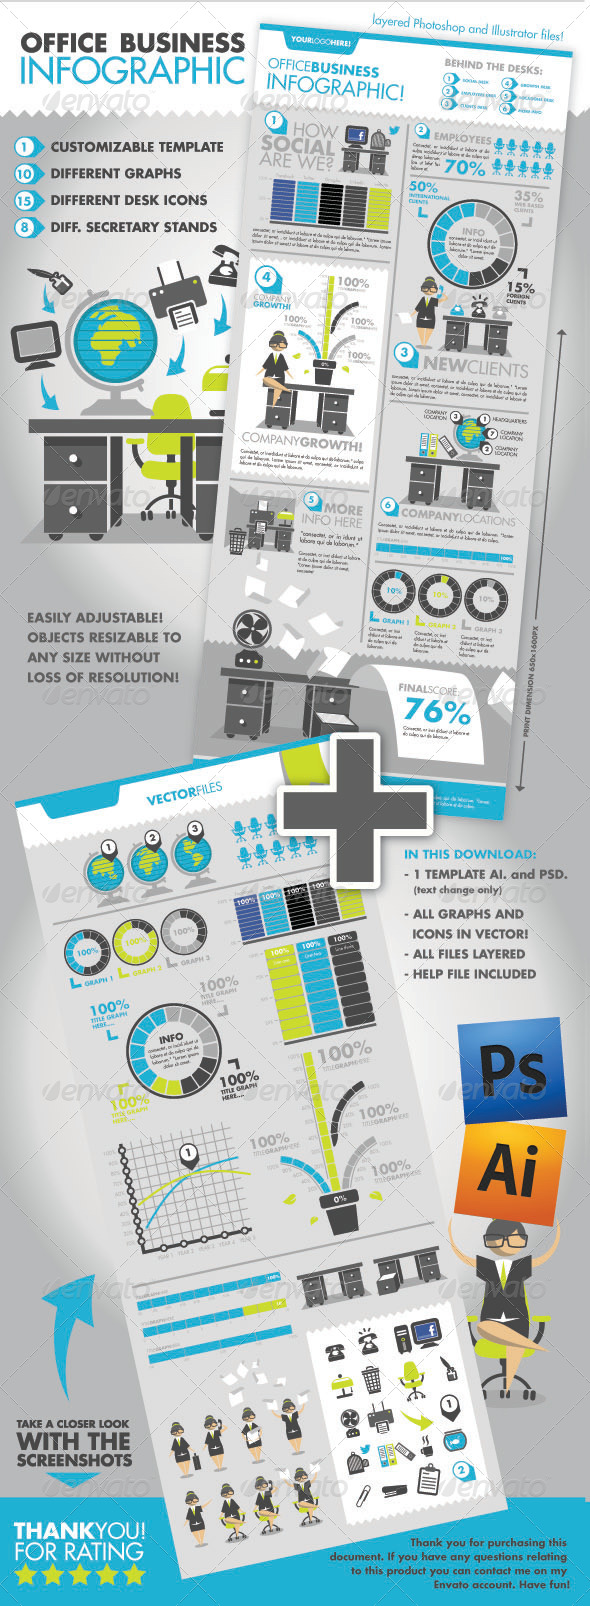 Office Business Infographic